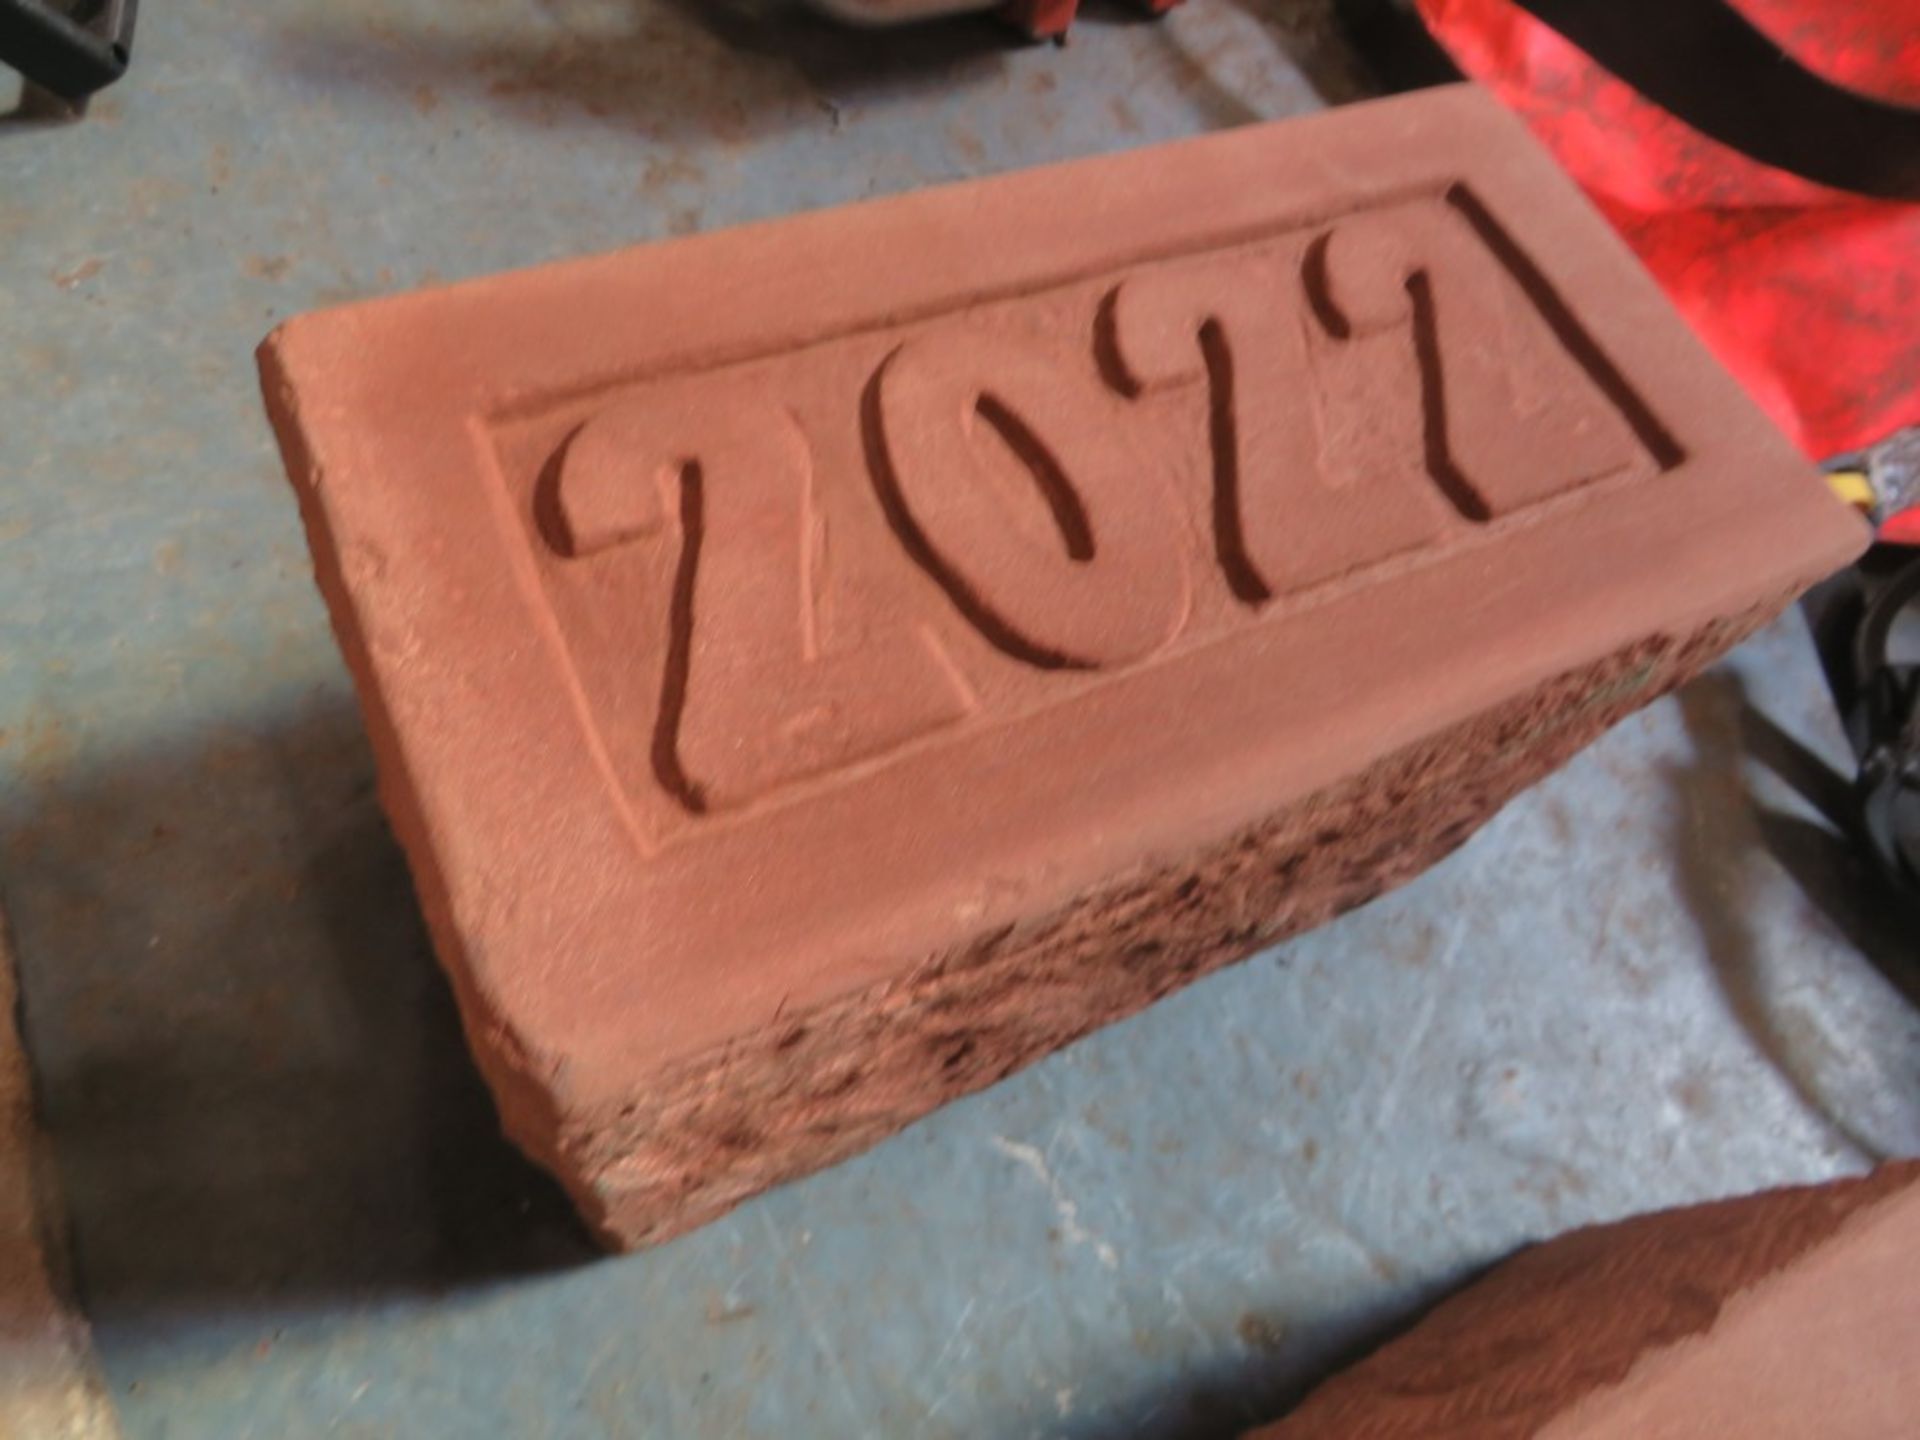 2022 DATE STONE HAND CARVED IN NATURAL SCOTTISH STONE [NO VAT]